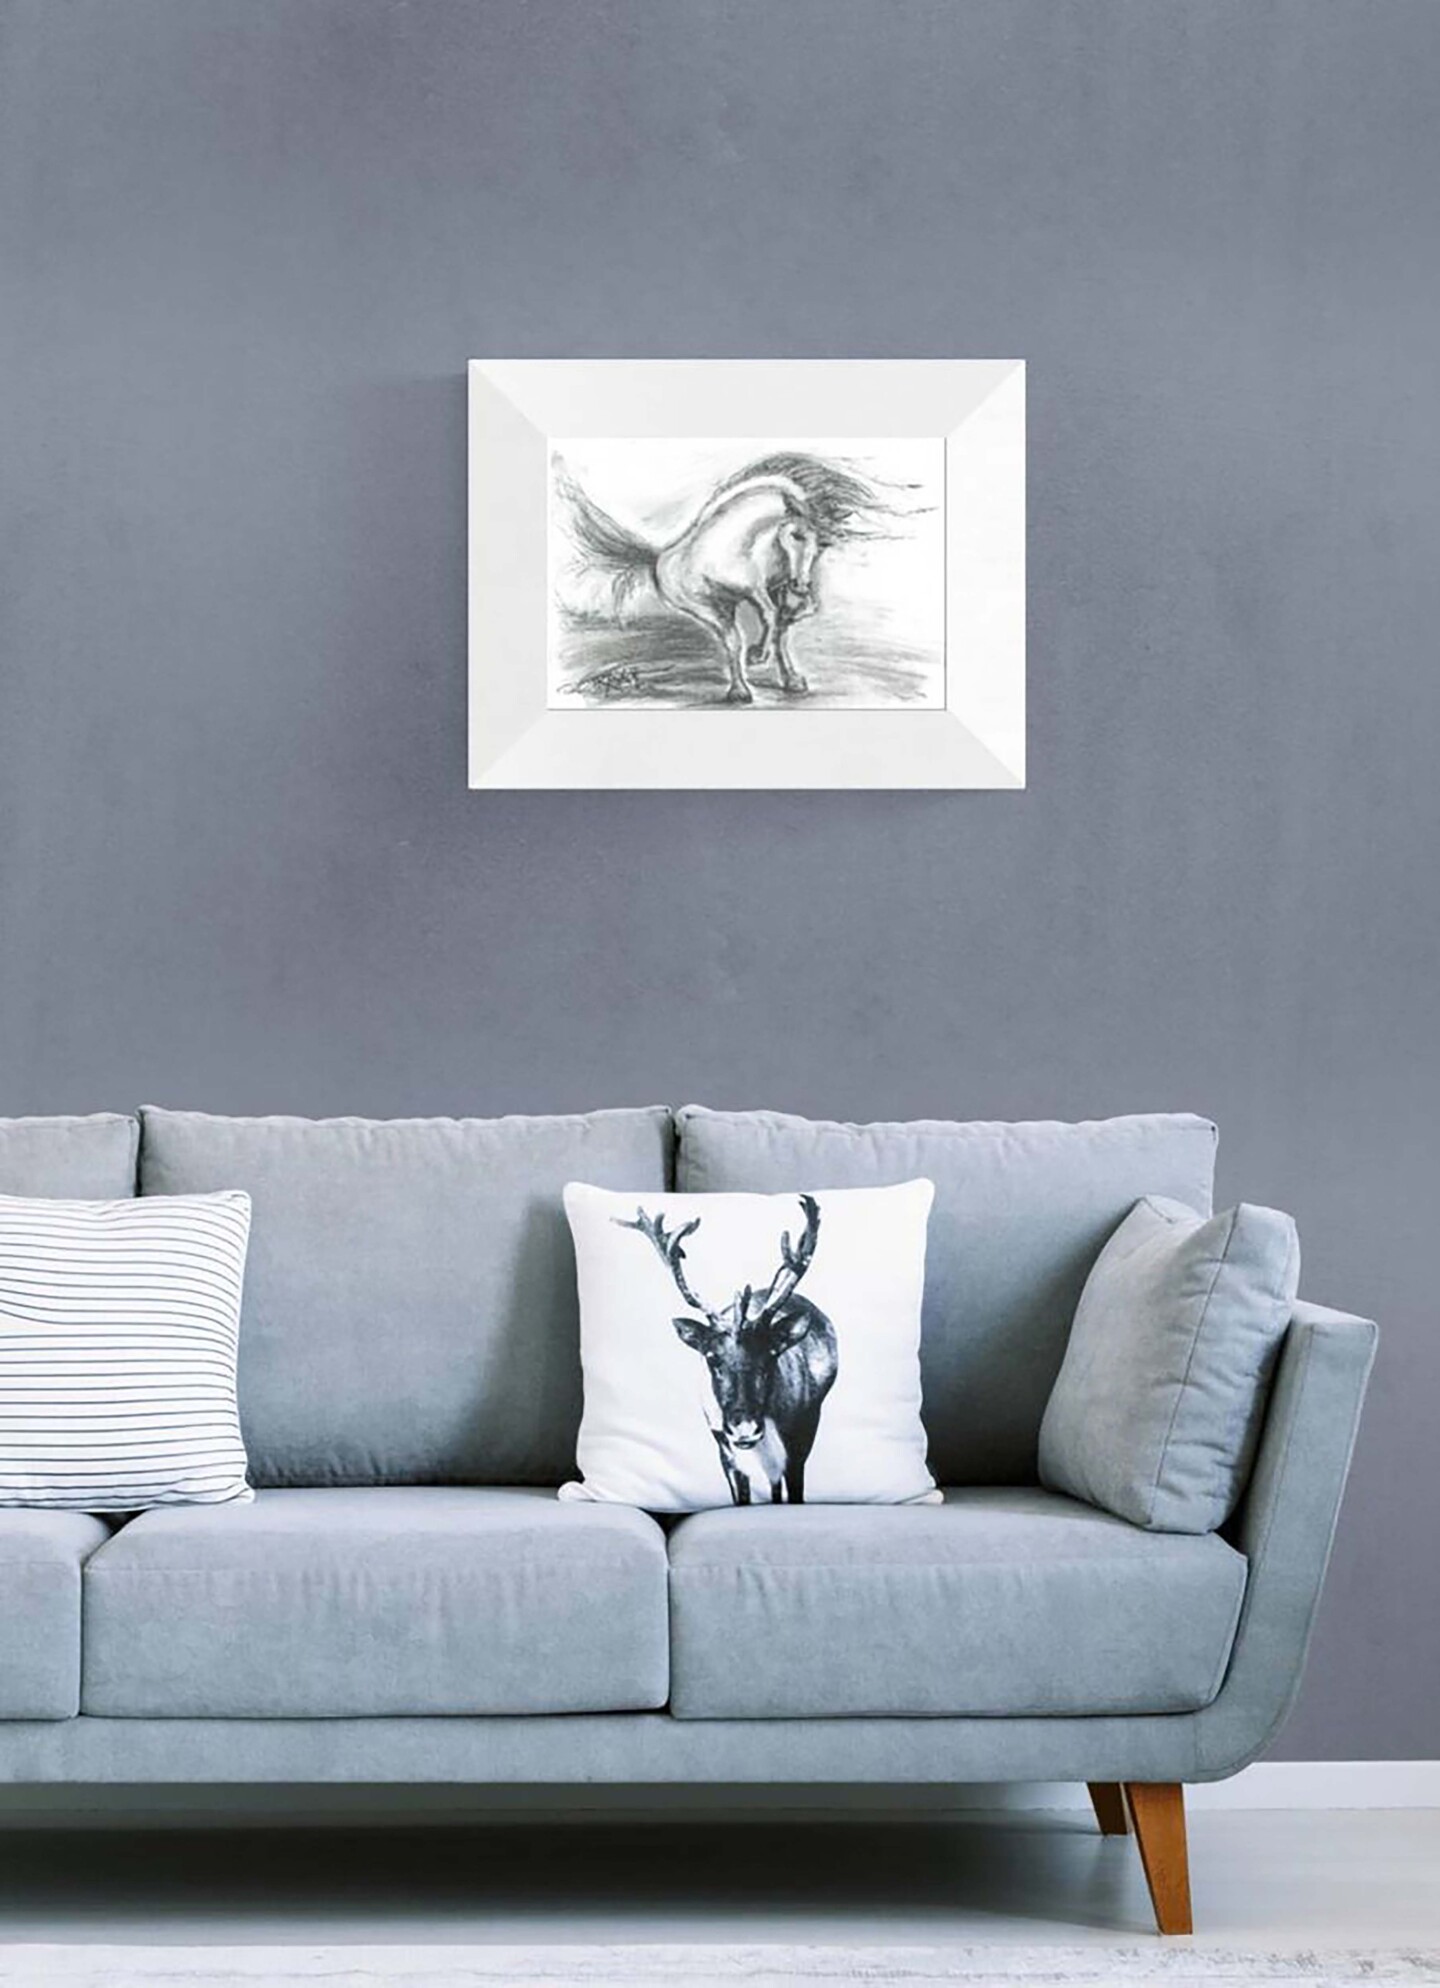 Original Artwork: Unconquered White Hors, Drawing by Diana Dimova ...